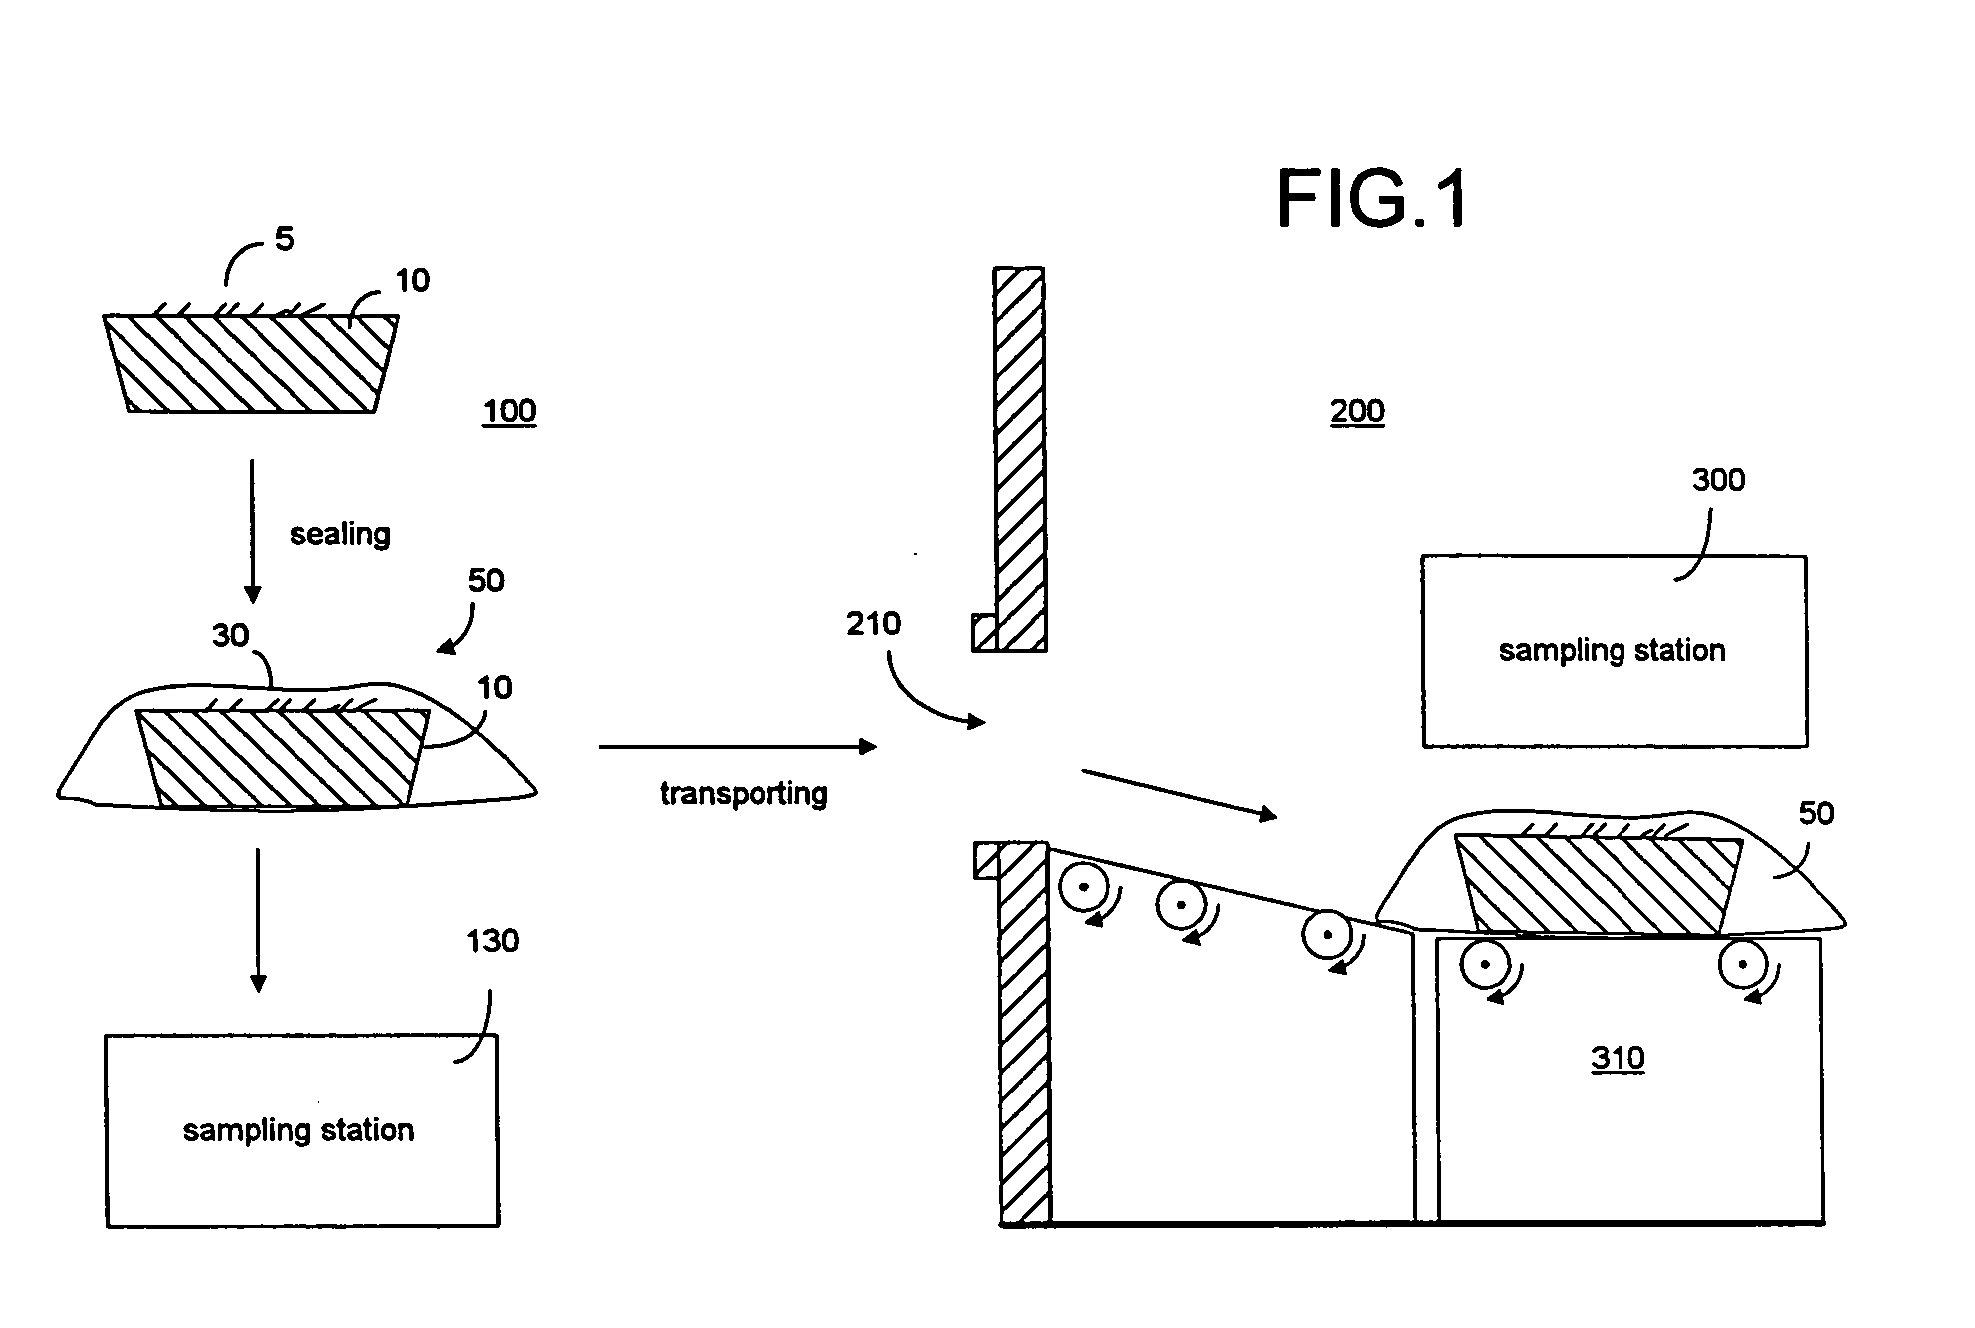 Method and device for isolating, collecting and transferring hazardous samples